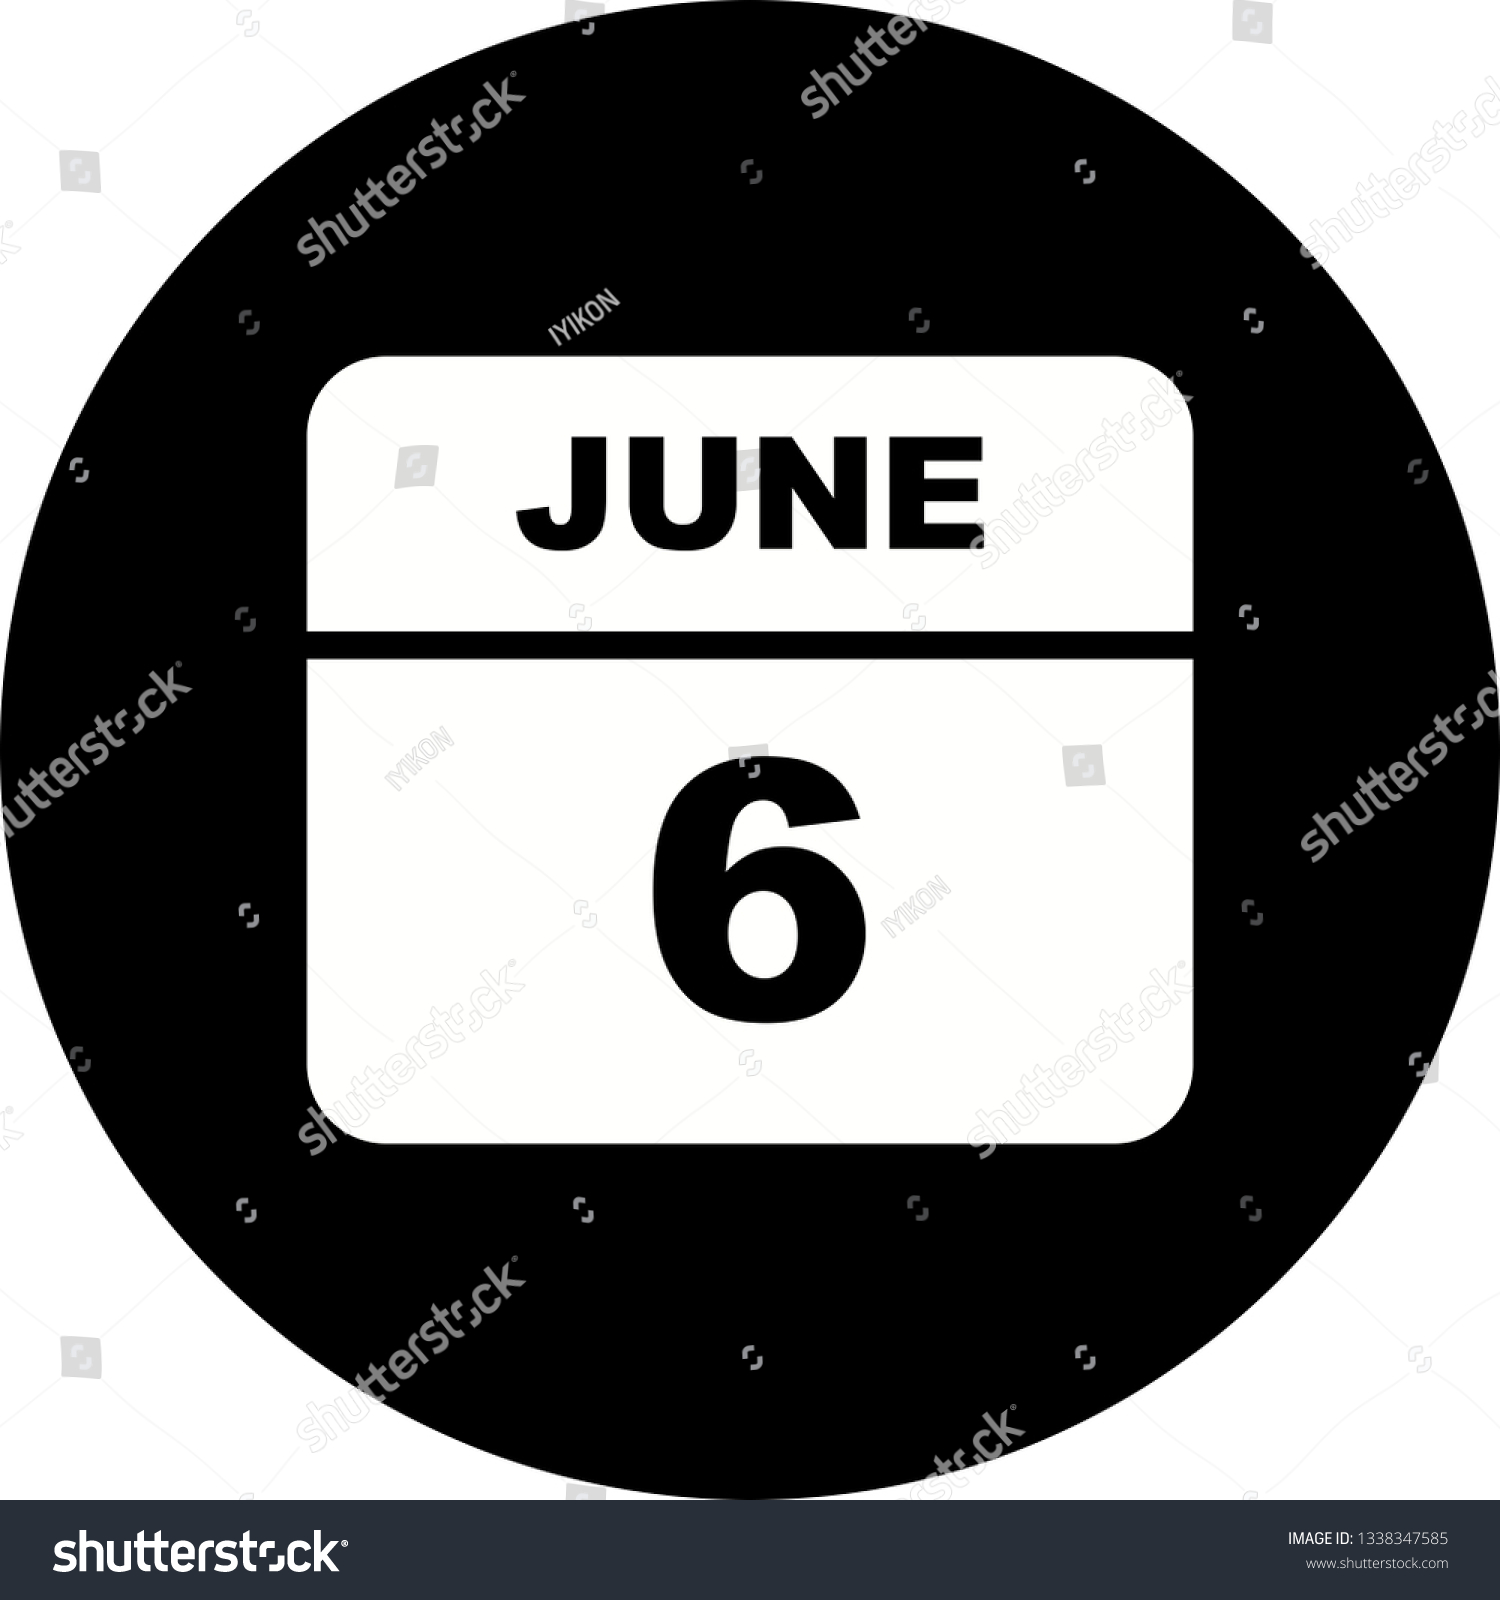 June 6th Date on a Single Day Calendar Royalty Free Stock Vector